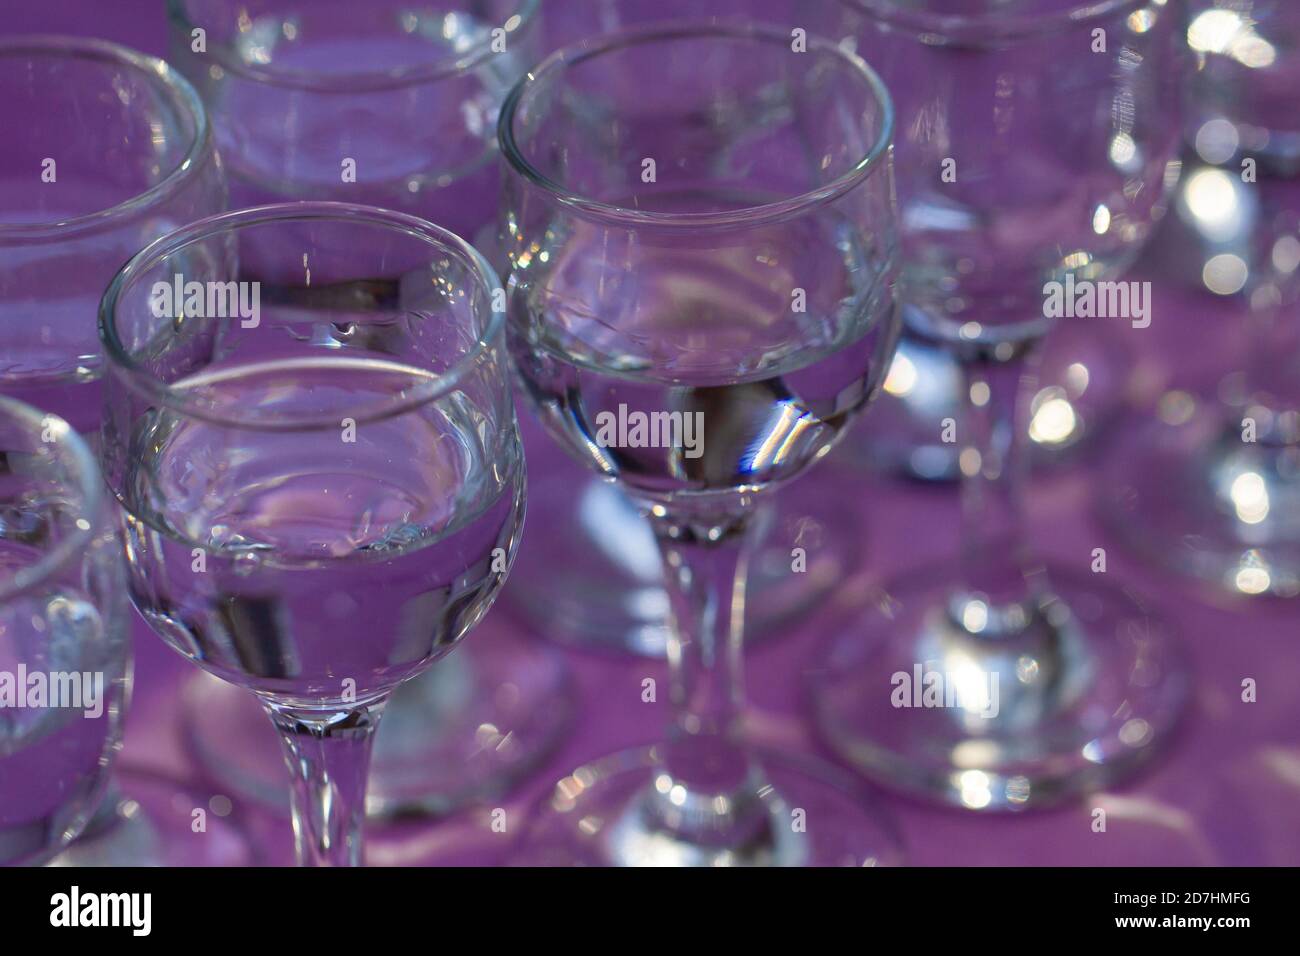 Elegant water glasses served on violet table, close up, top view Stock Photo